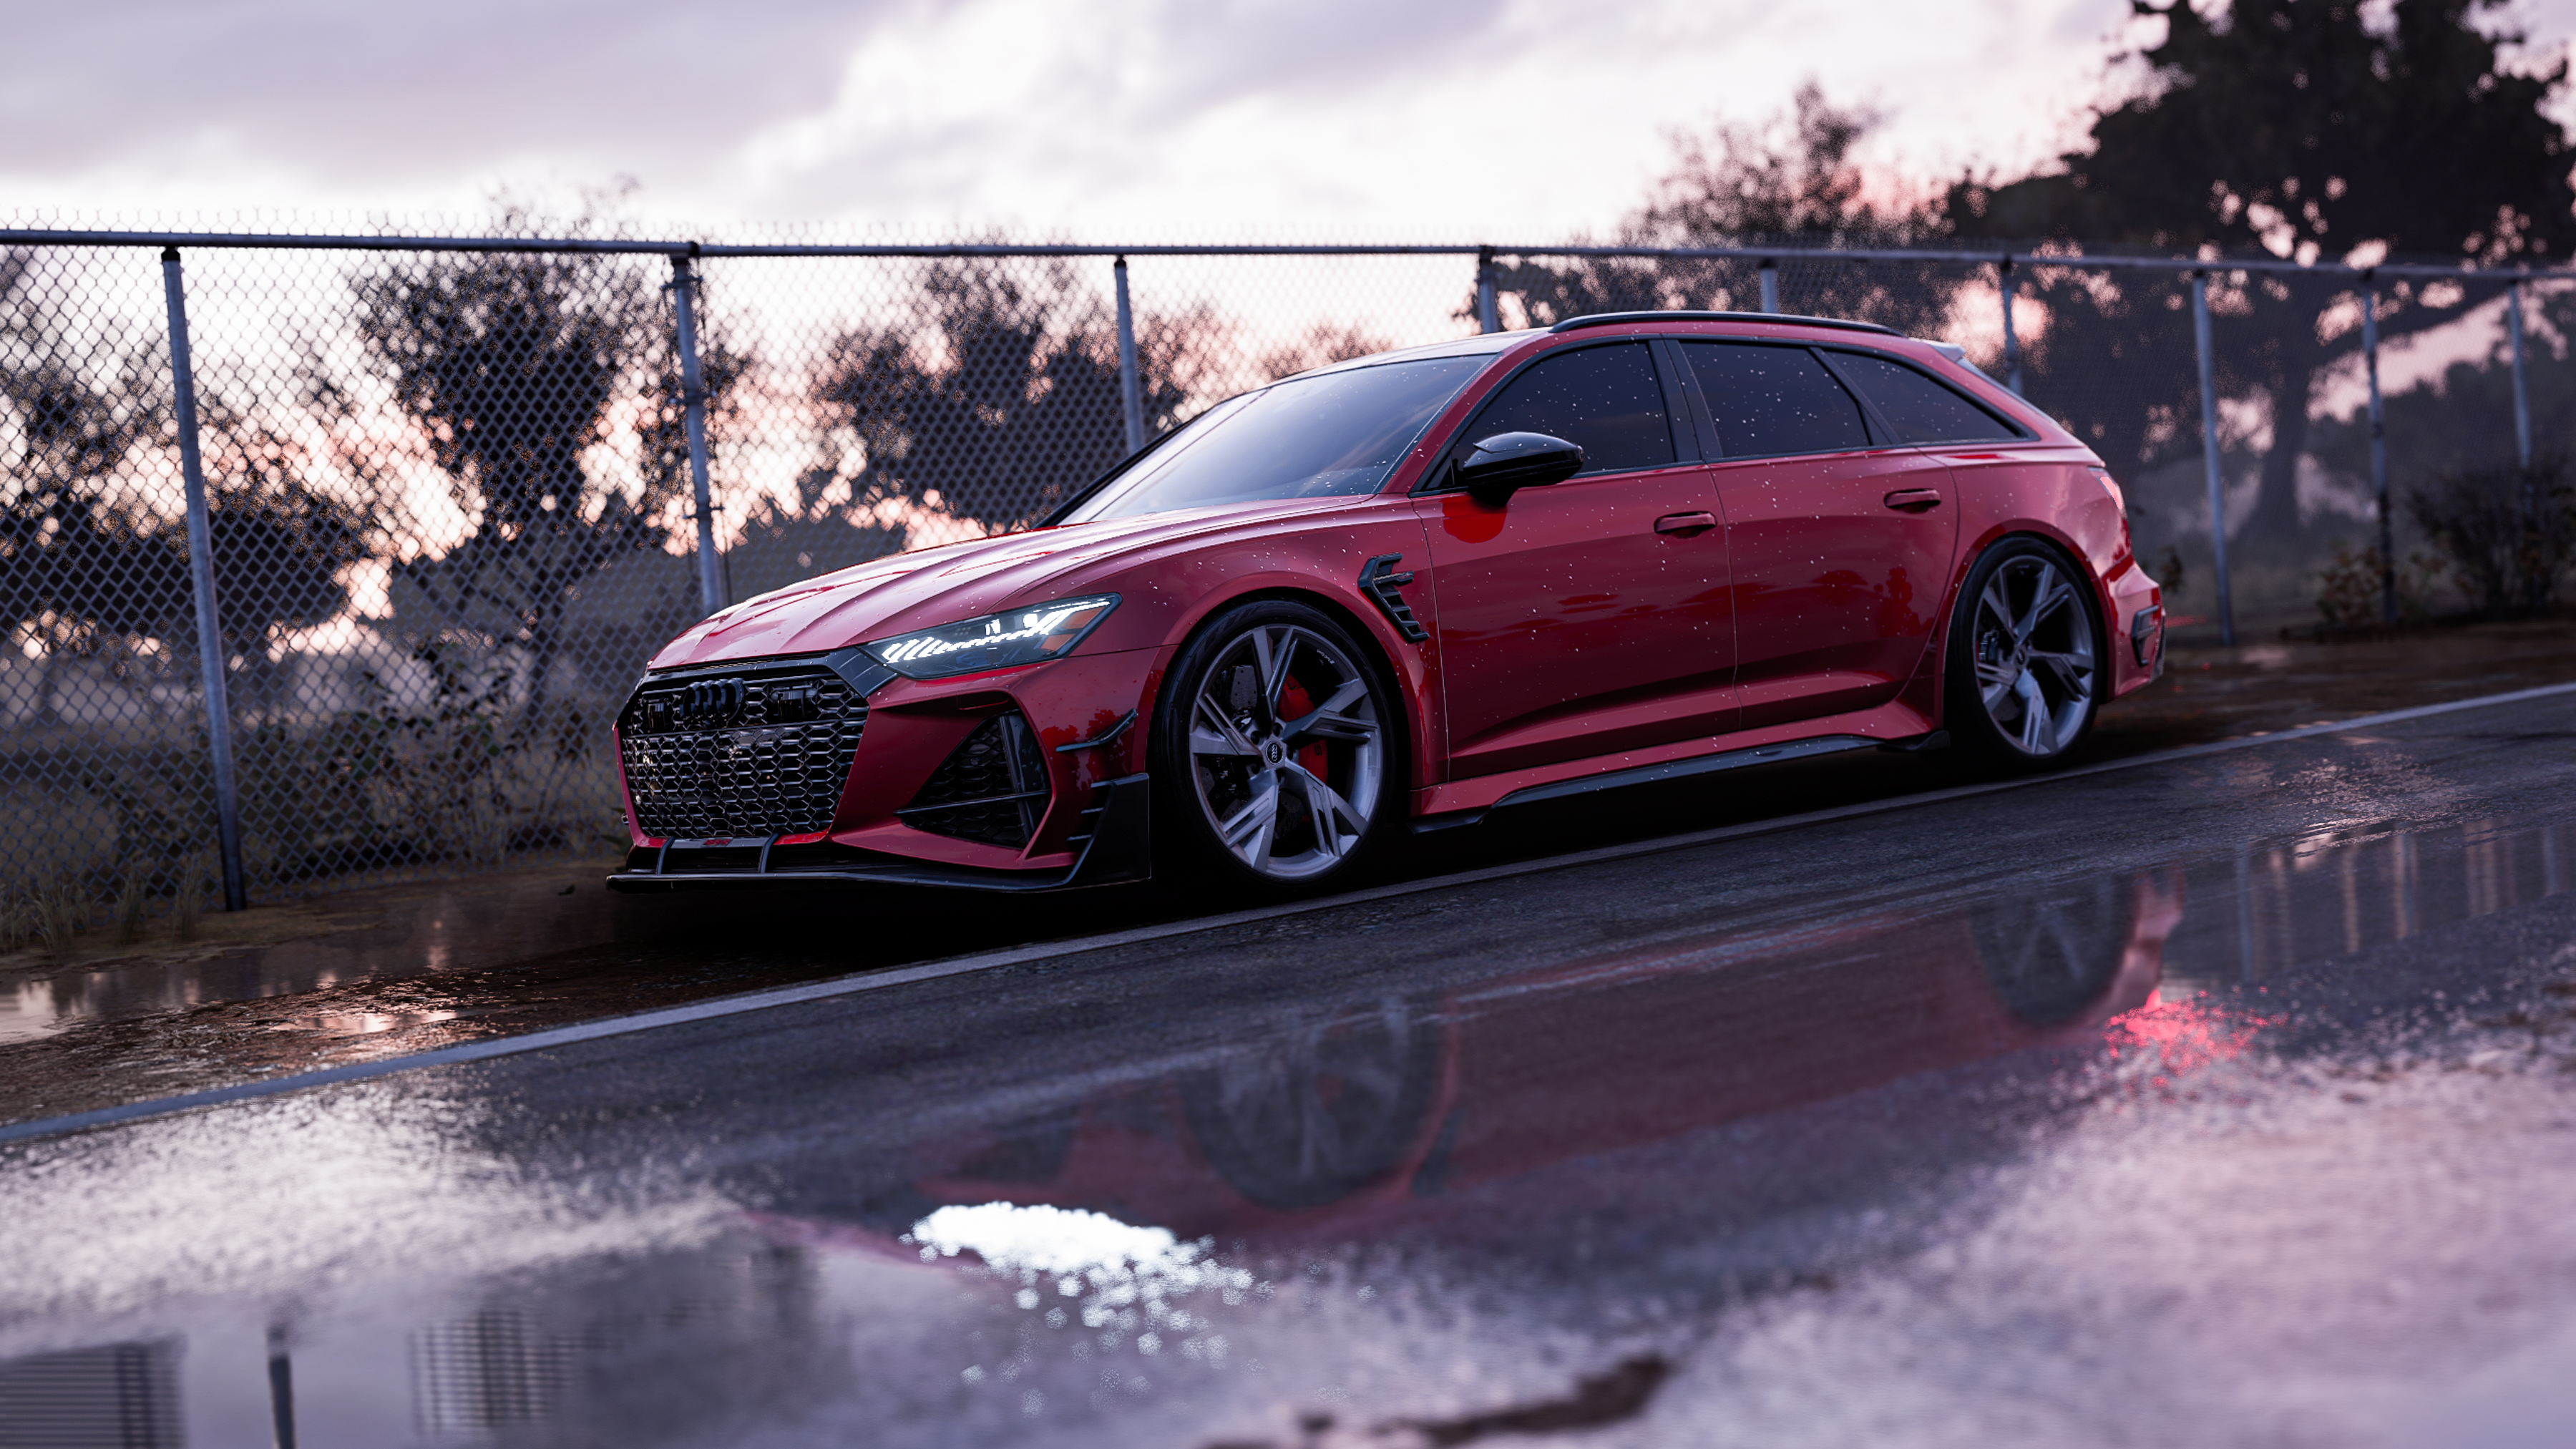 General 3600x2025 Forza Forza Horizon 5 Audi RS6 station wagon German cars video games PlaygroundGames car Volkswagen Group Audi fence reflection sky clouds trees water headlights frontal view video game art CGI vehicle blurred sunlight